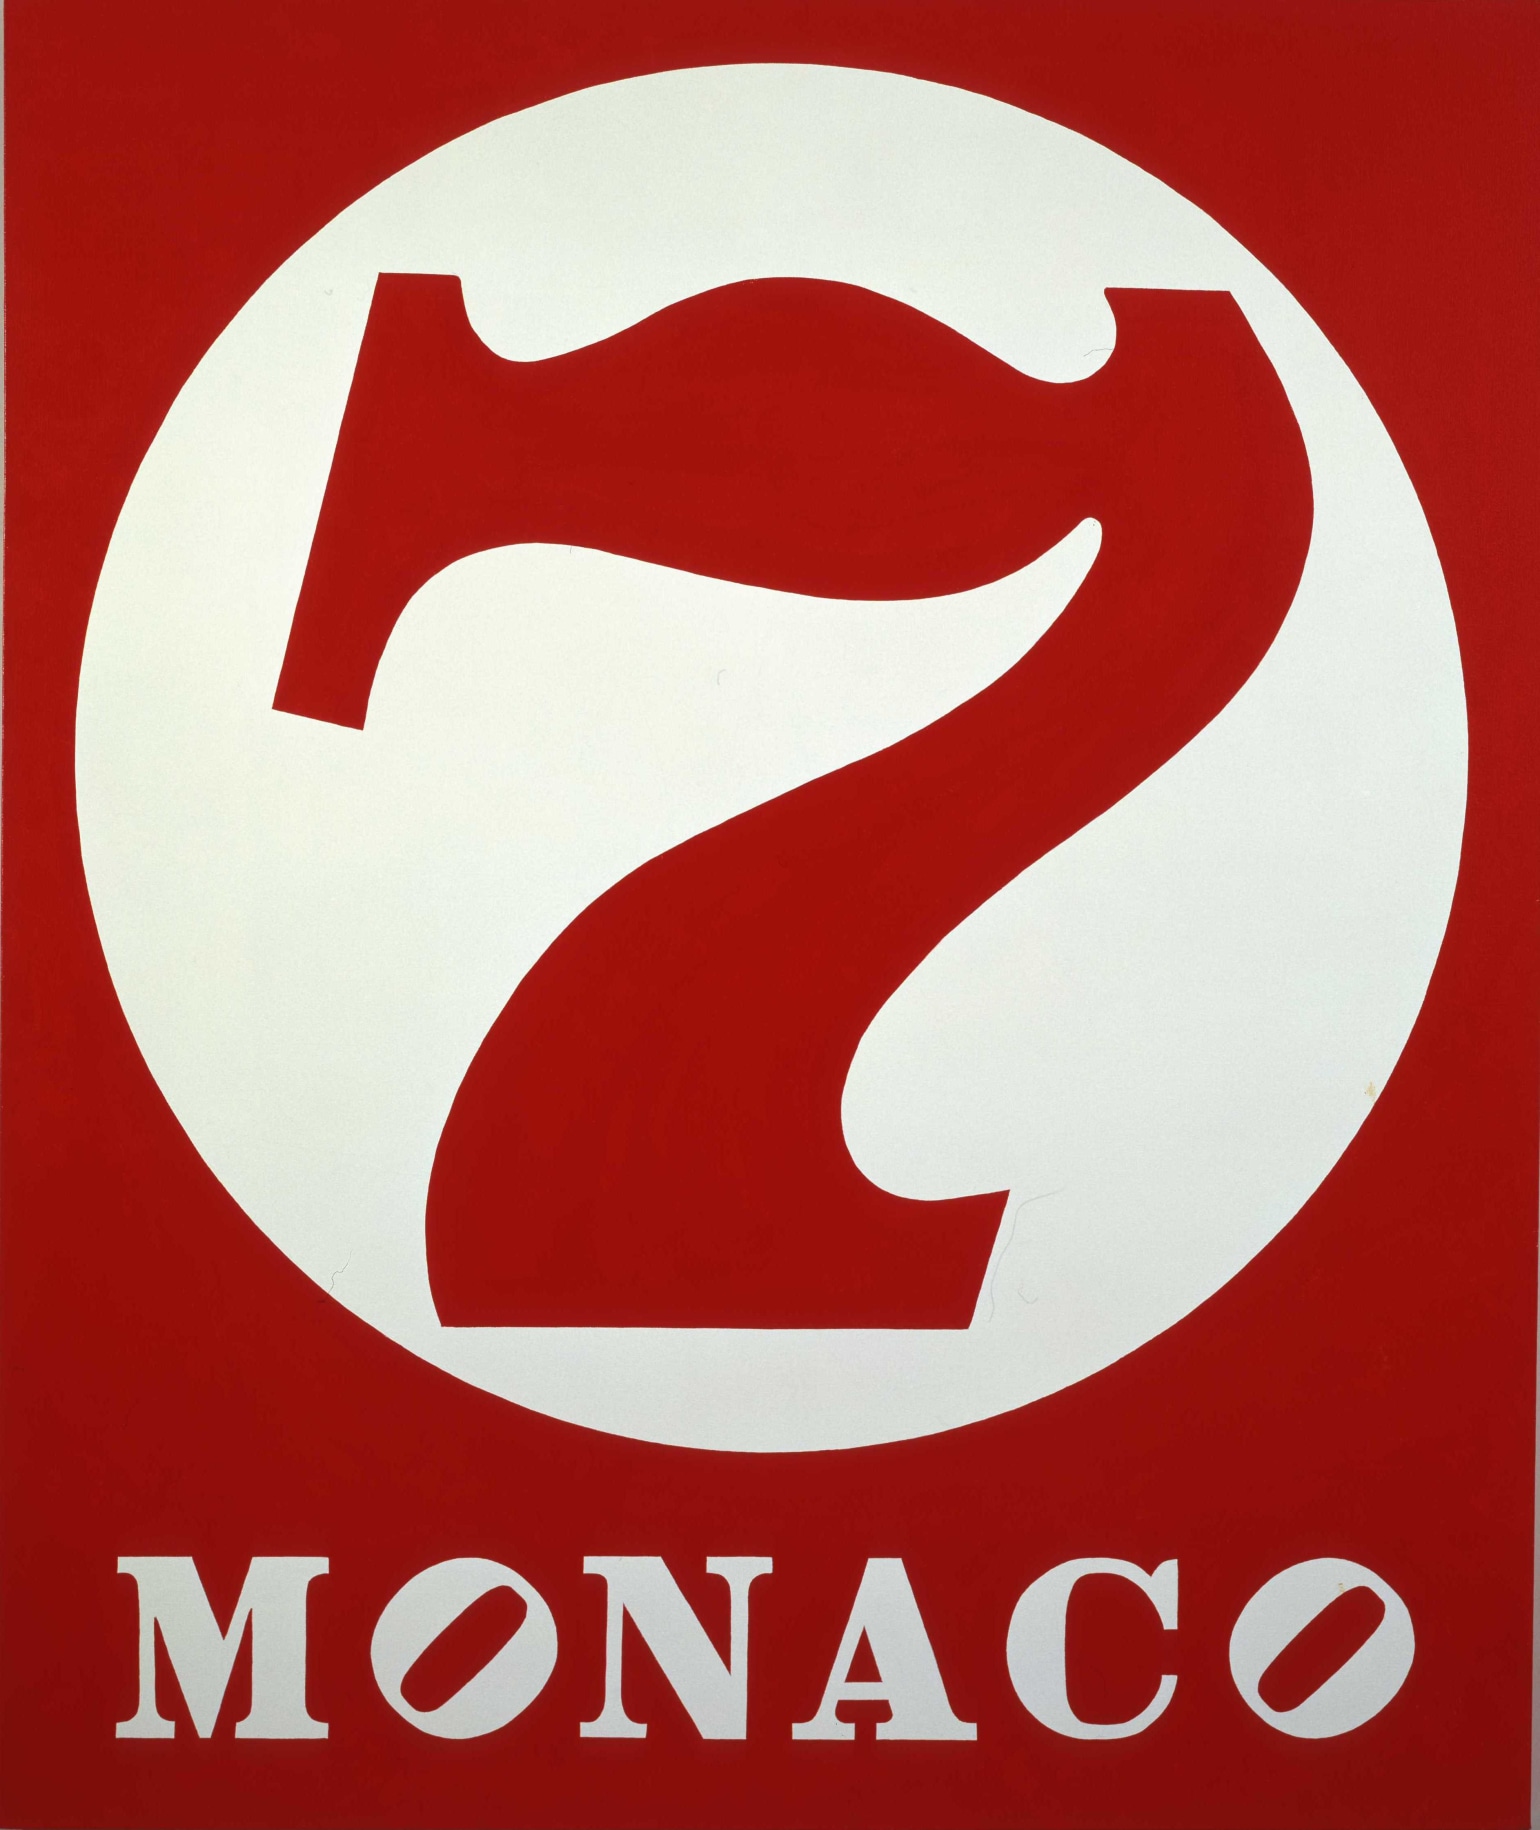 A rectanguar painting with a red ground. Monaco has been painted in white letters across the bottom of the canvas, both of the letter &quot;o&quot;s are tilted. Above this is a large white circle with a red numeral seven inside.